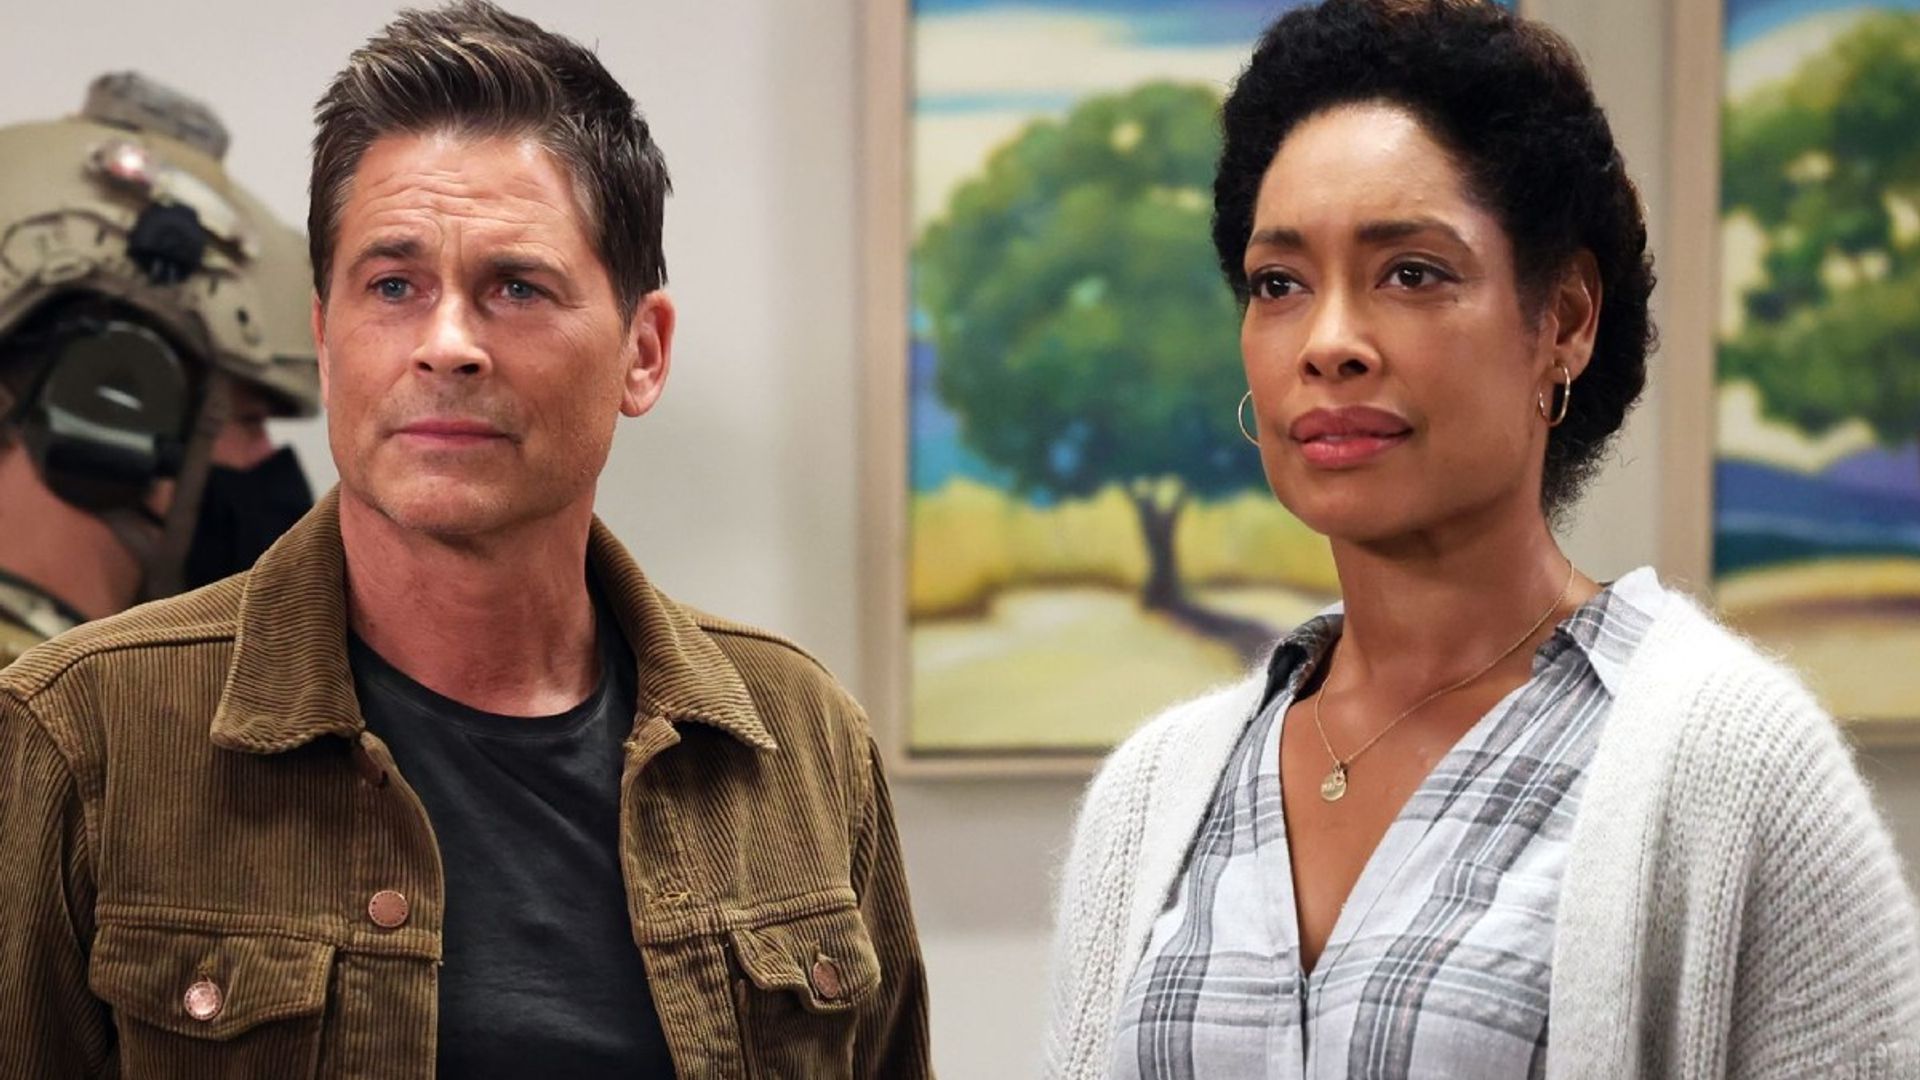 9-1-1 Lone Star’s Gina Torres joins Rob Lowe and Angela Bassett for Super Bowl party